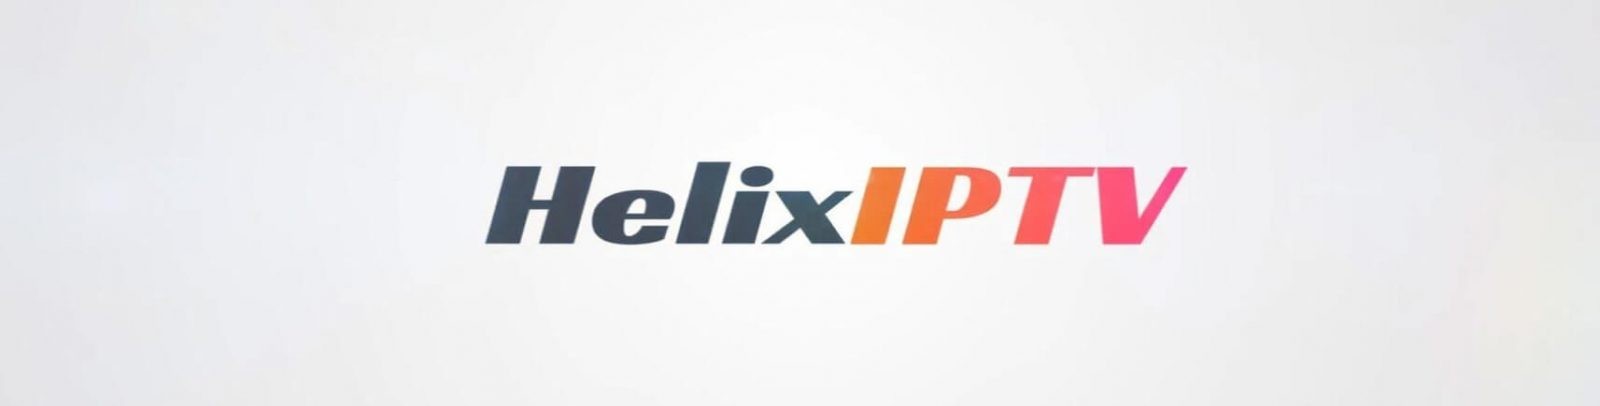 Helix IPTV – Stream 6500+ Channels Starting at €7